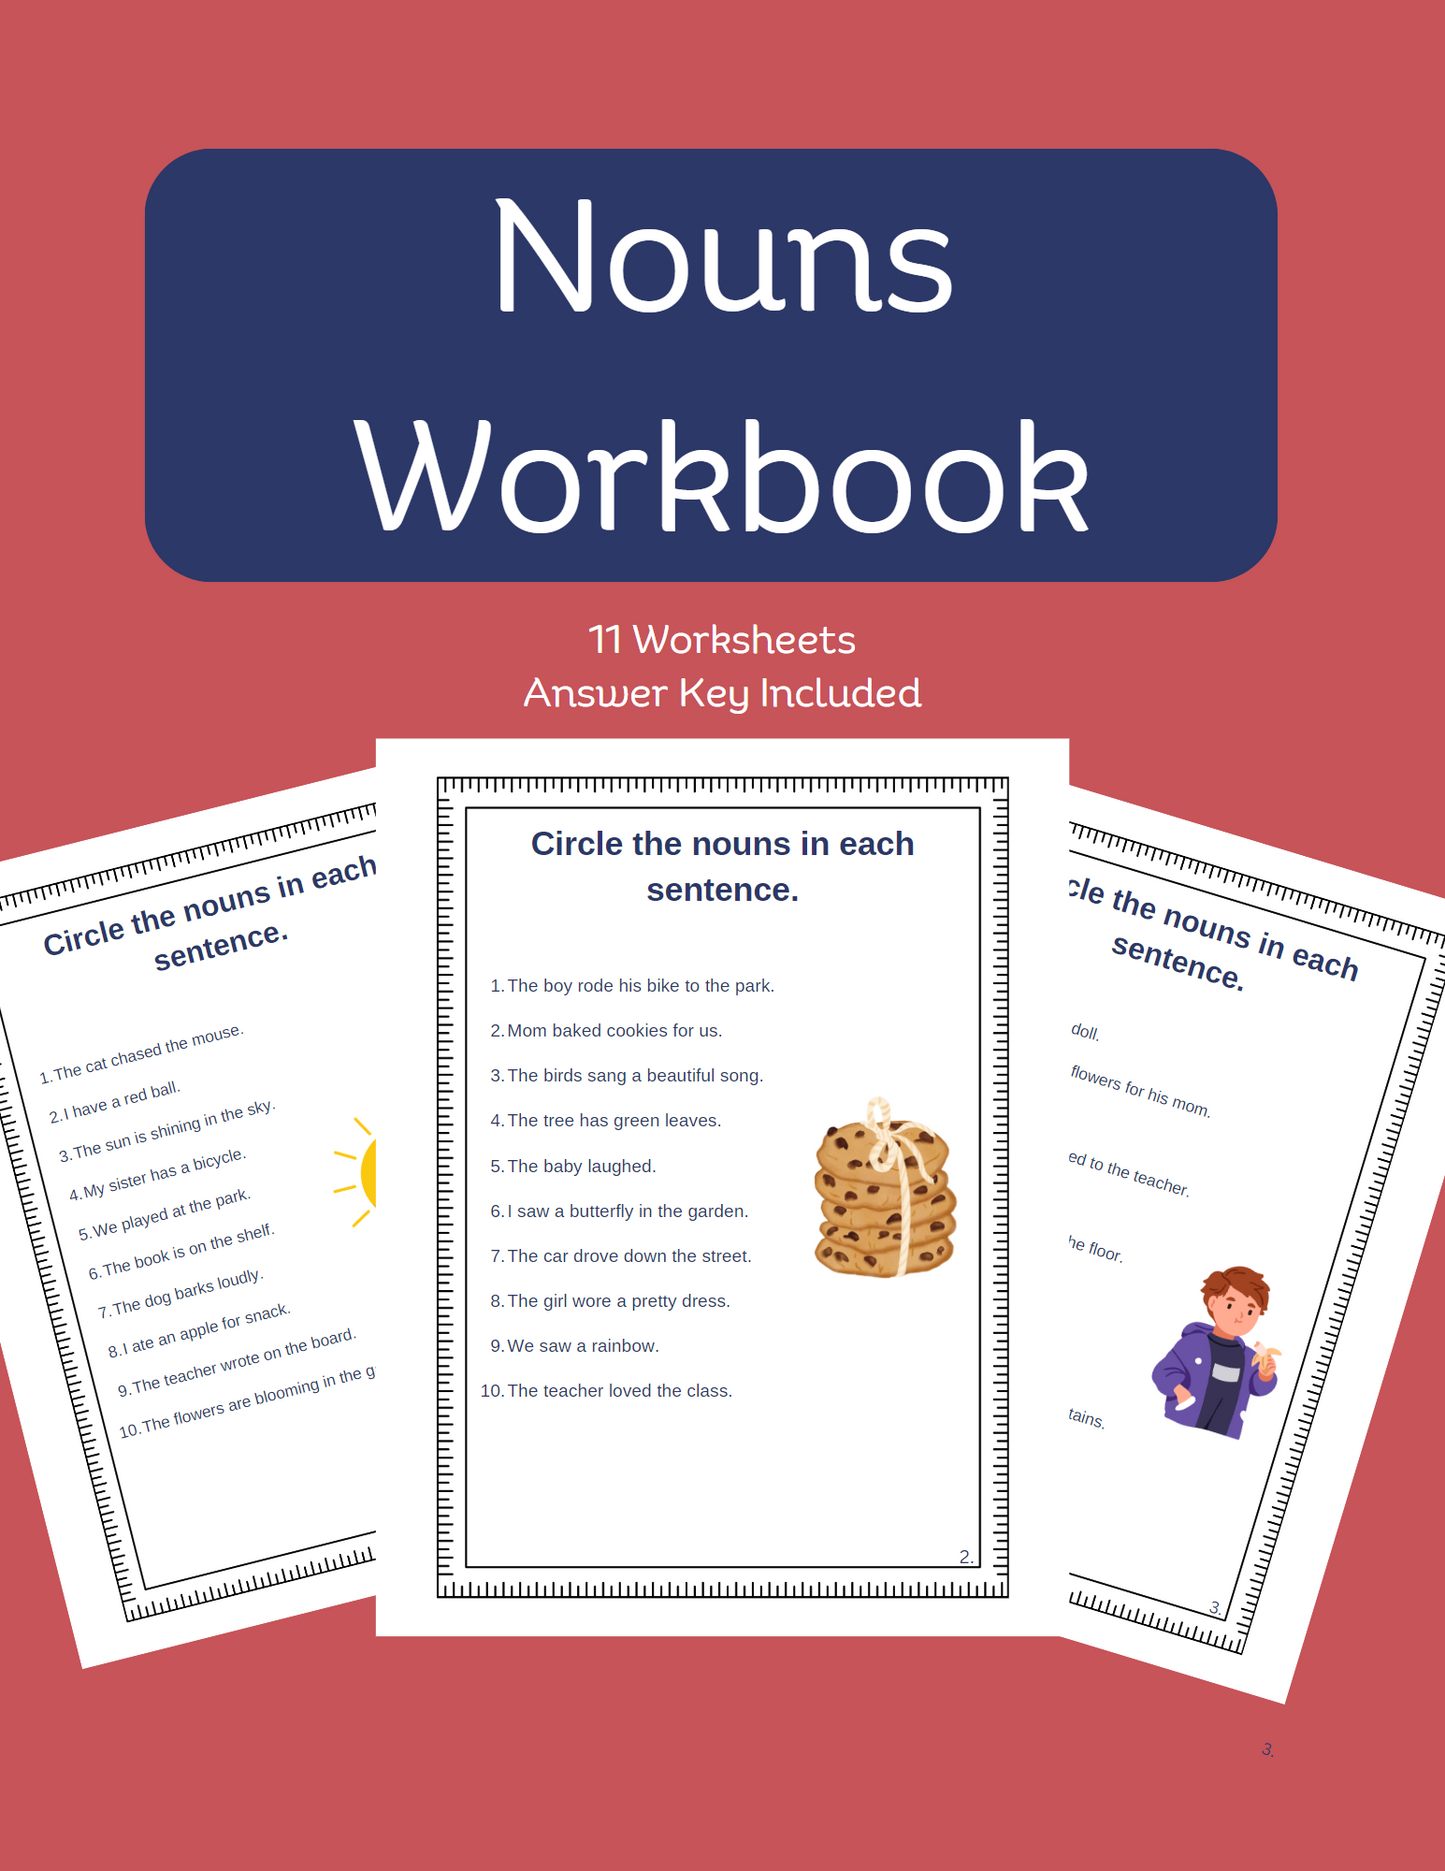 Noun Worksheet Pages for 2nd - 4th Grades